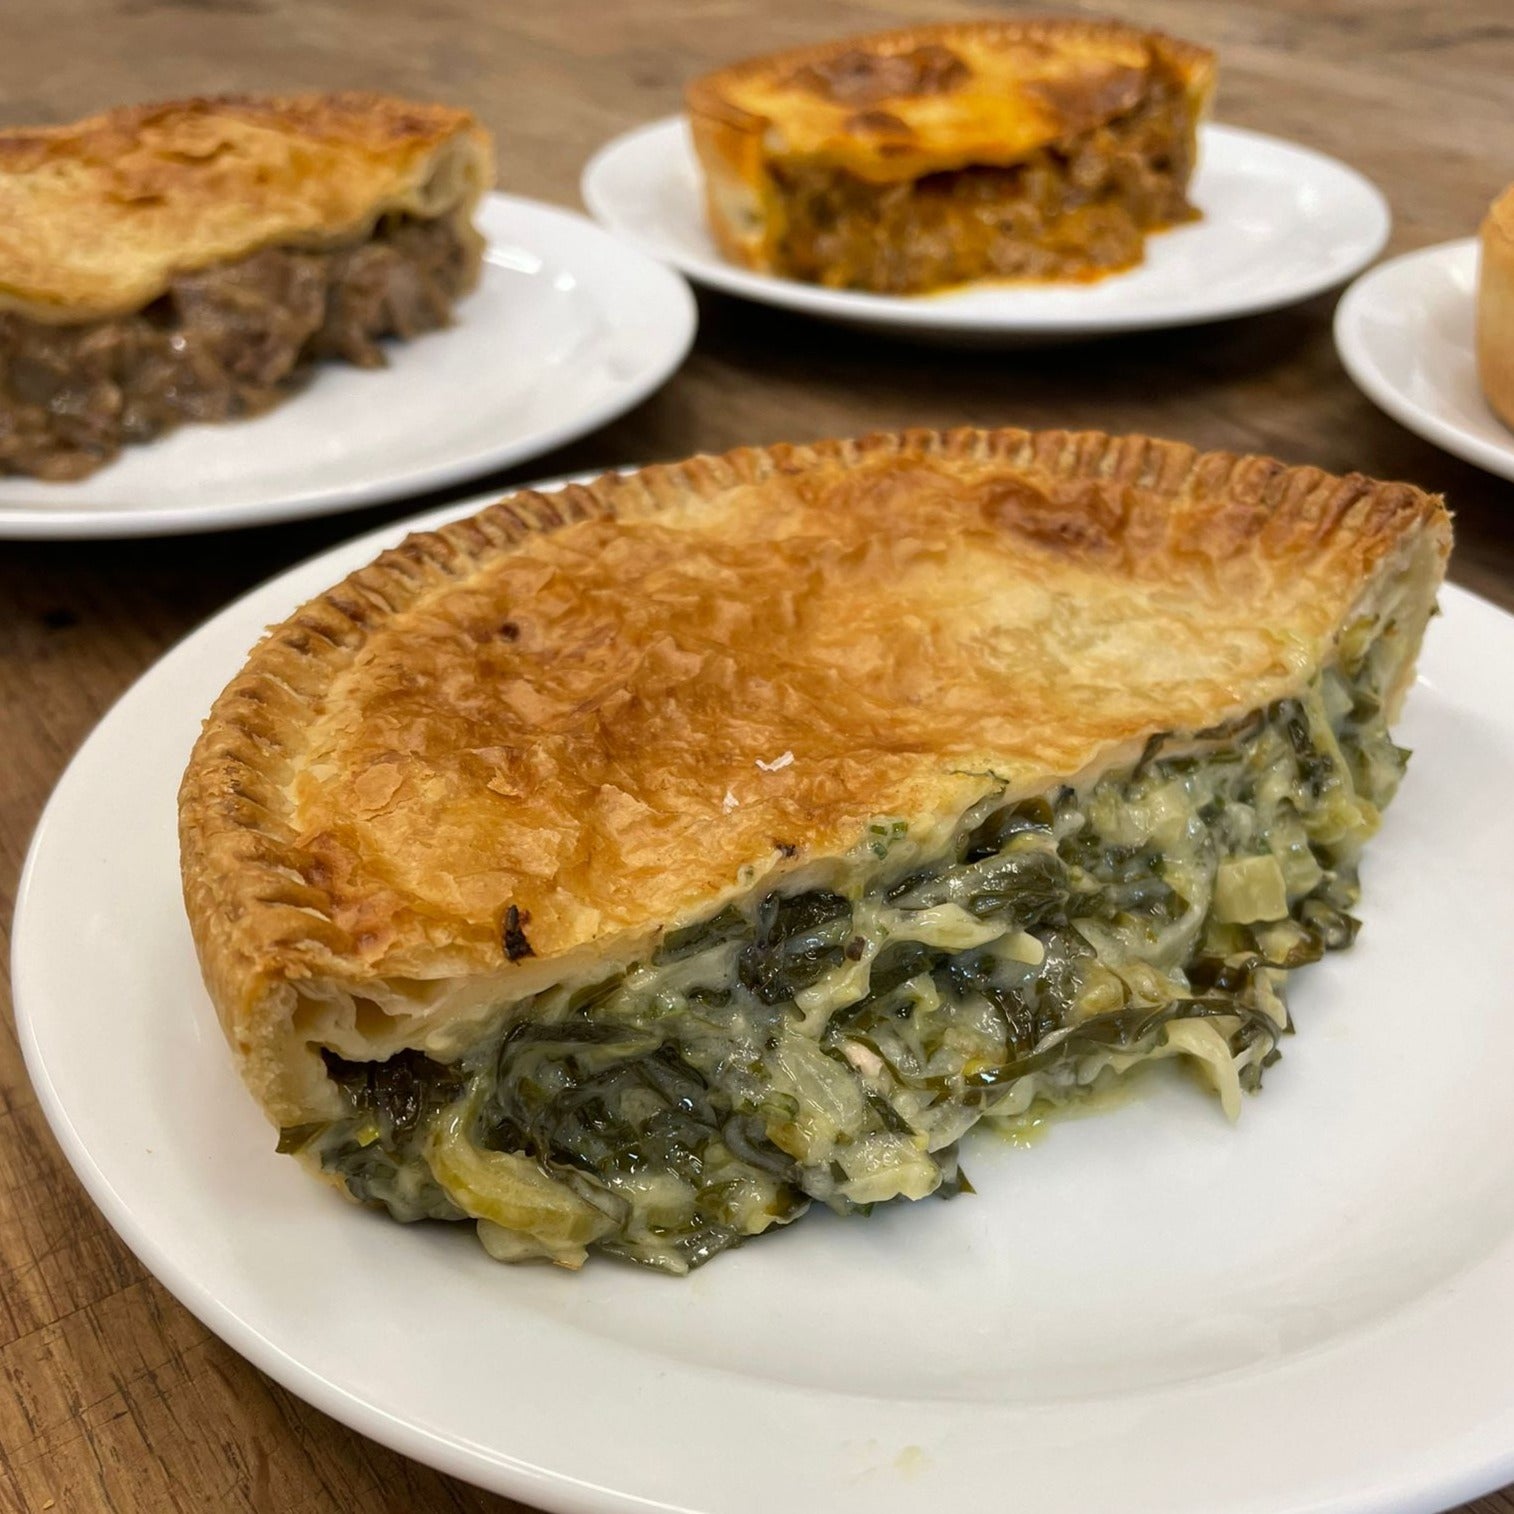 SPRING GREEN, GUBBEEN + CHIVE PIE